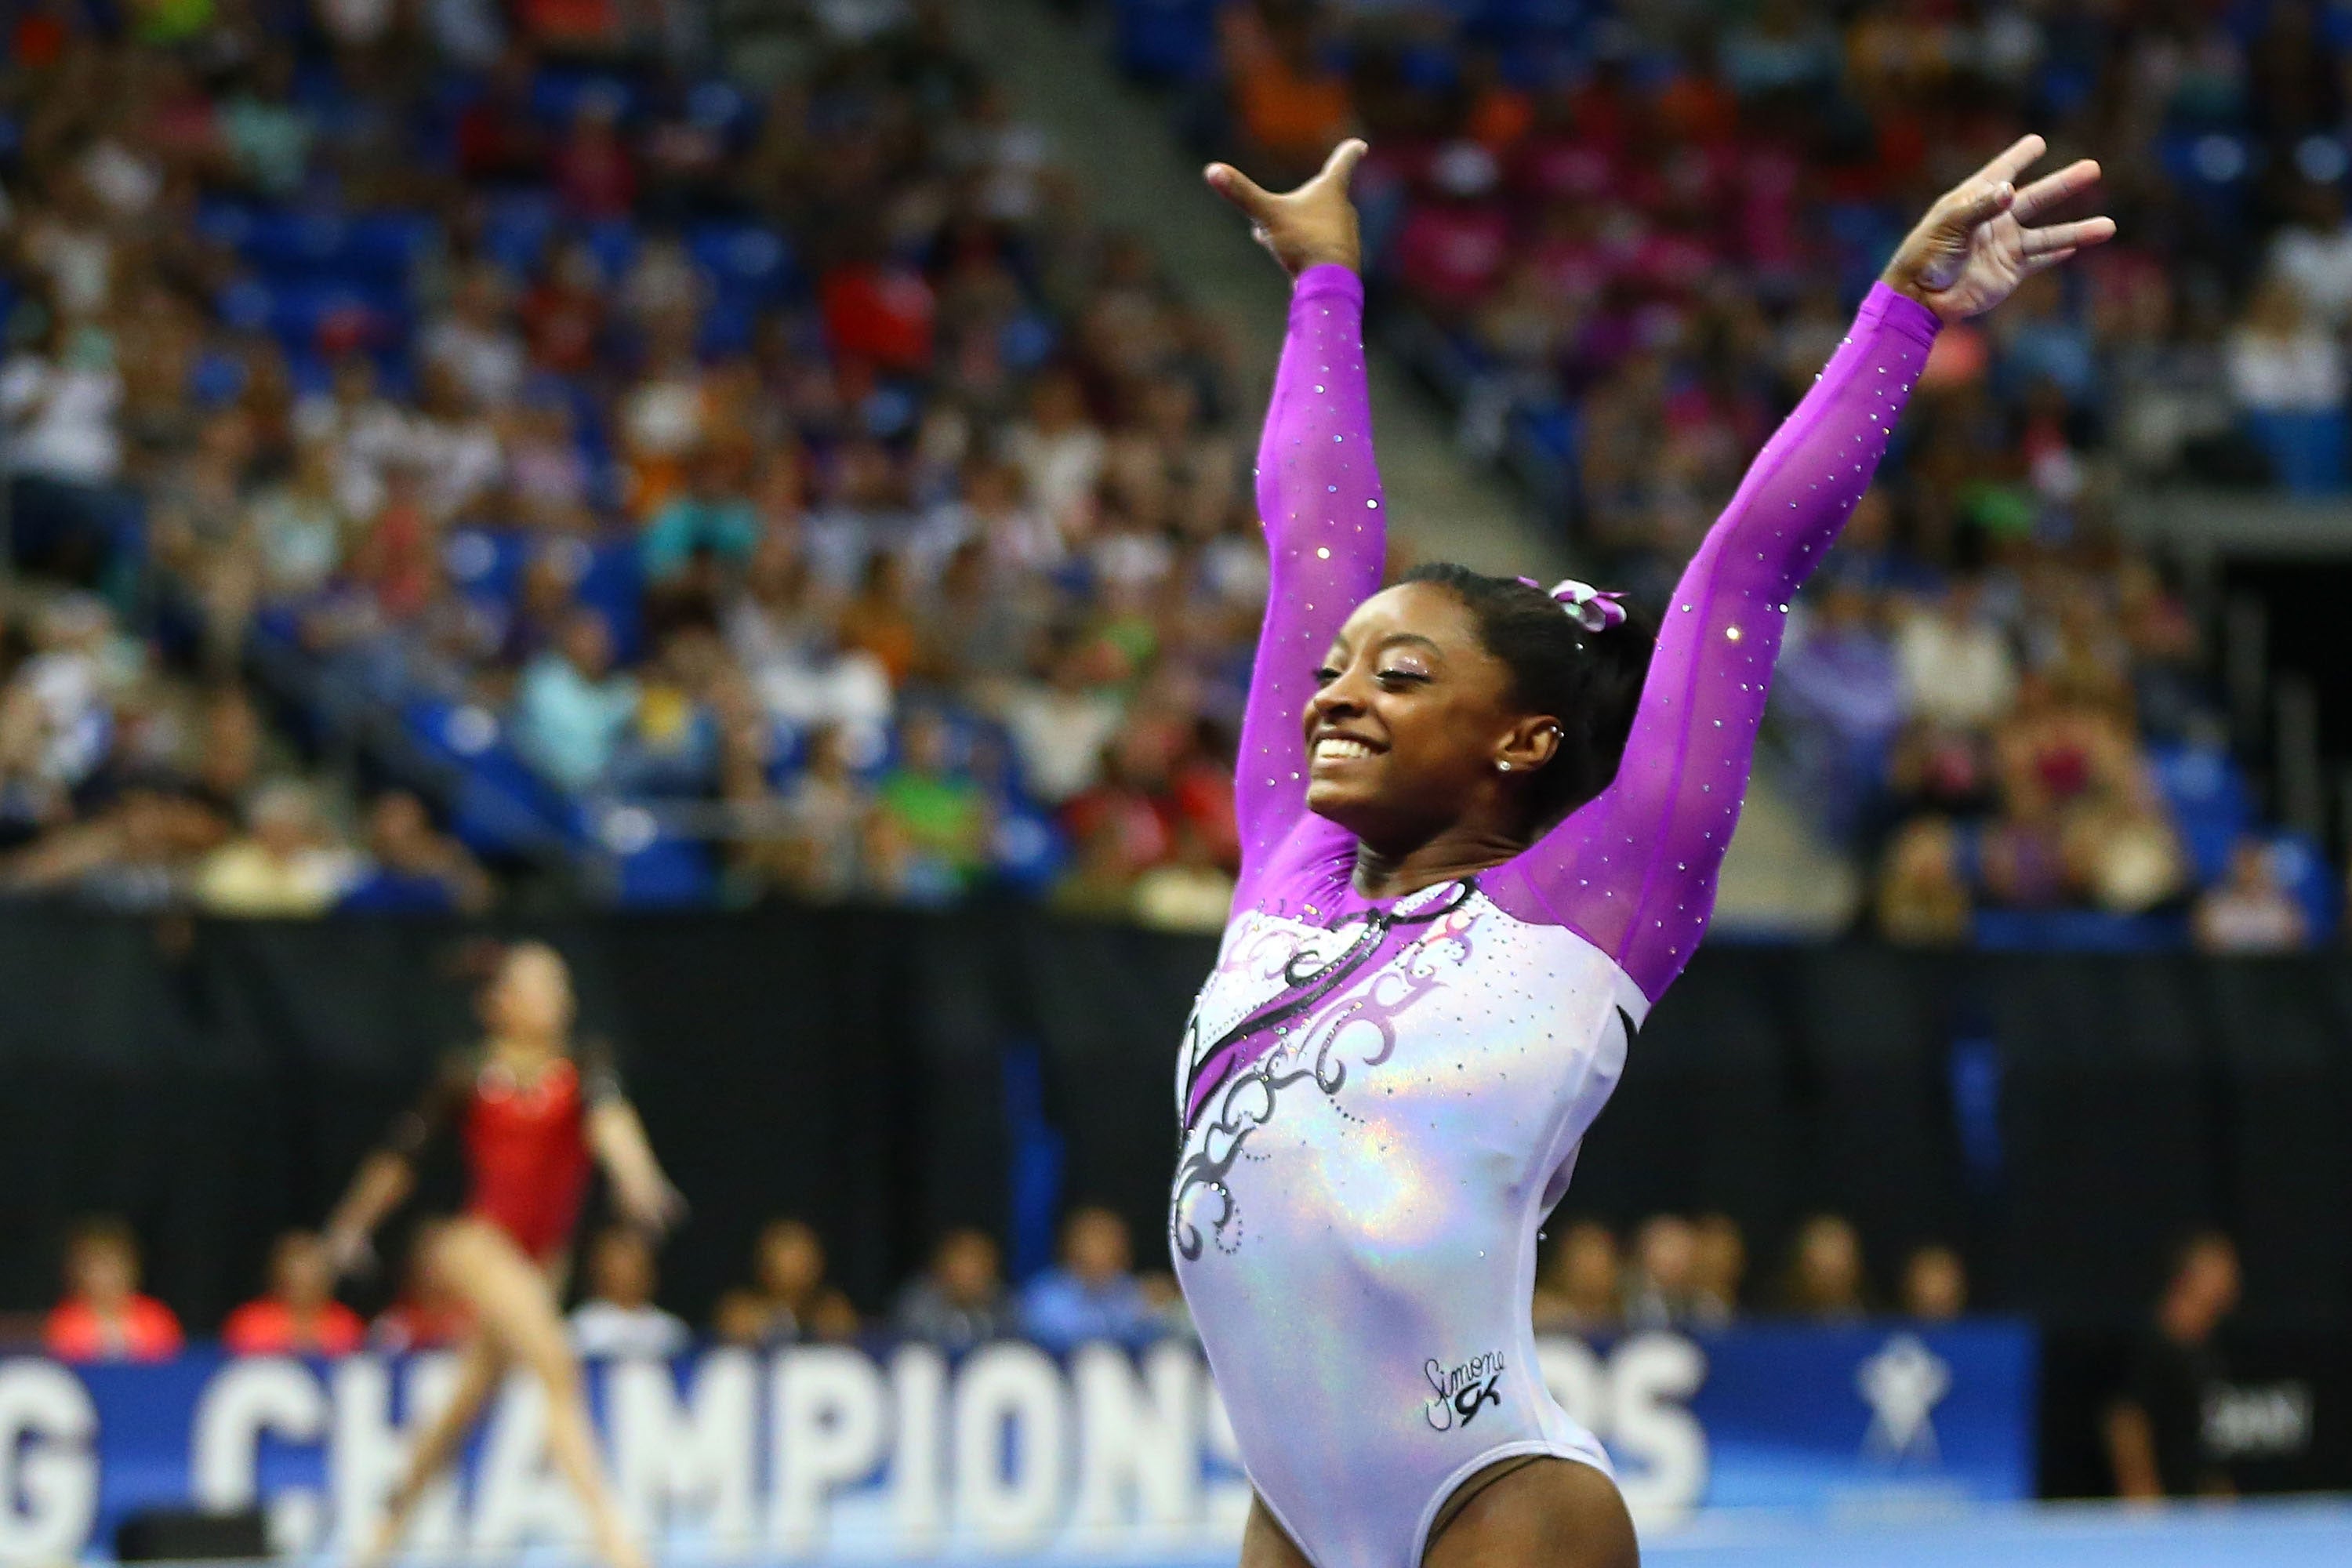 How Simone Biles Overcame Being Given up by Her Mother to Become an Olympic Gold Hopeful
